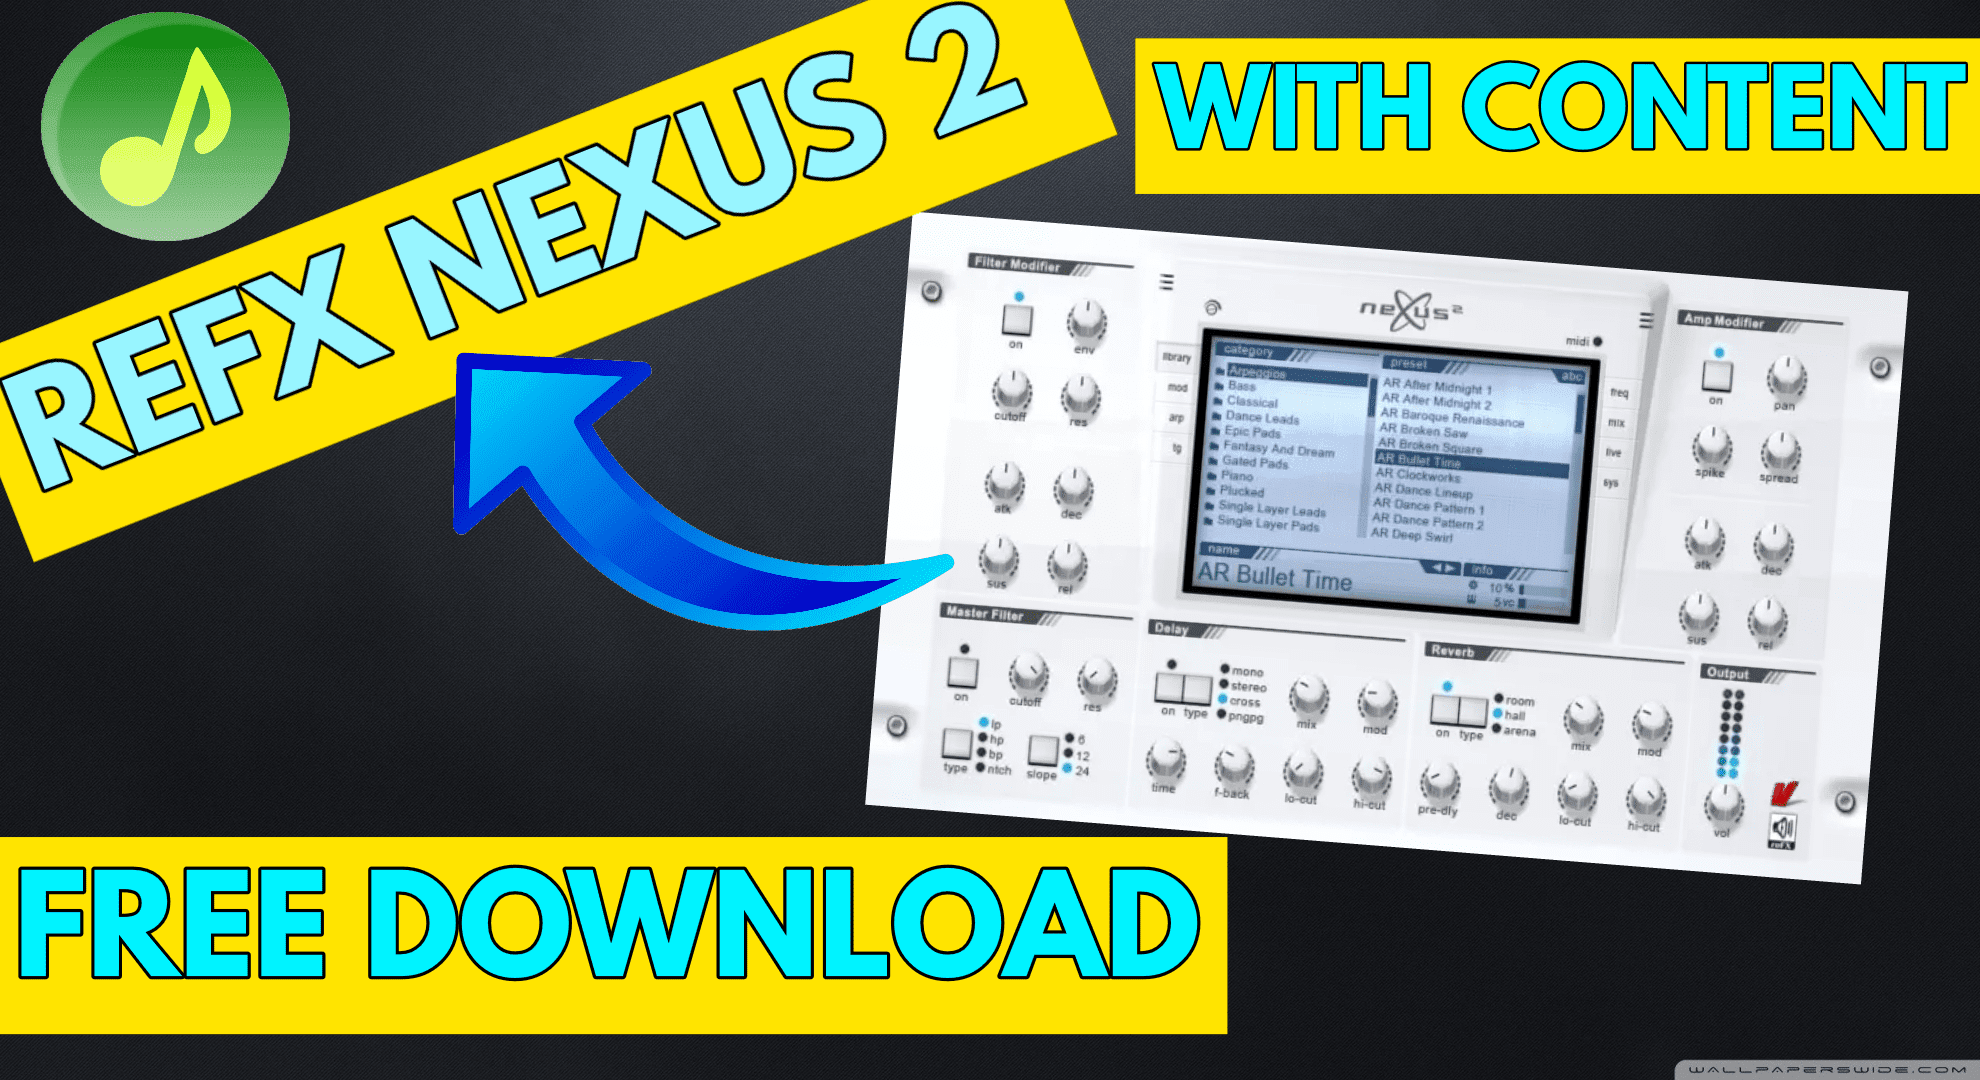 download into the nexus for free